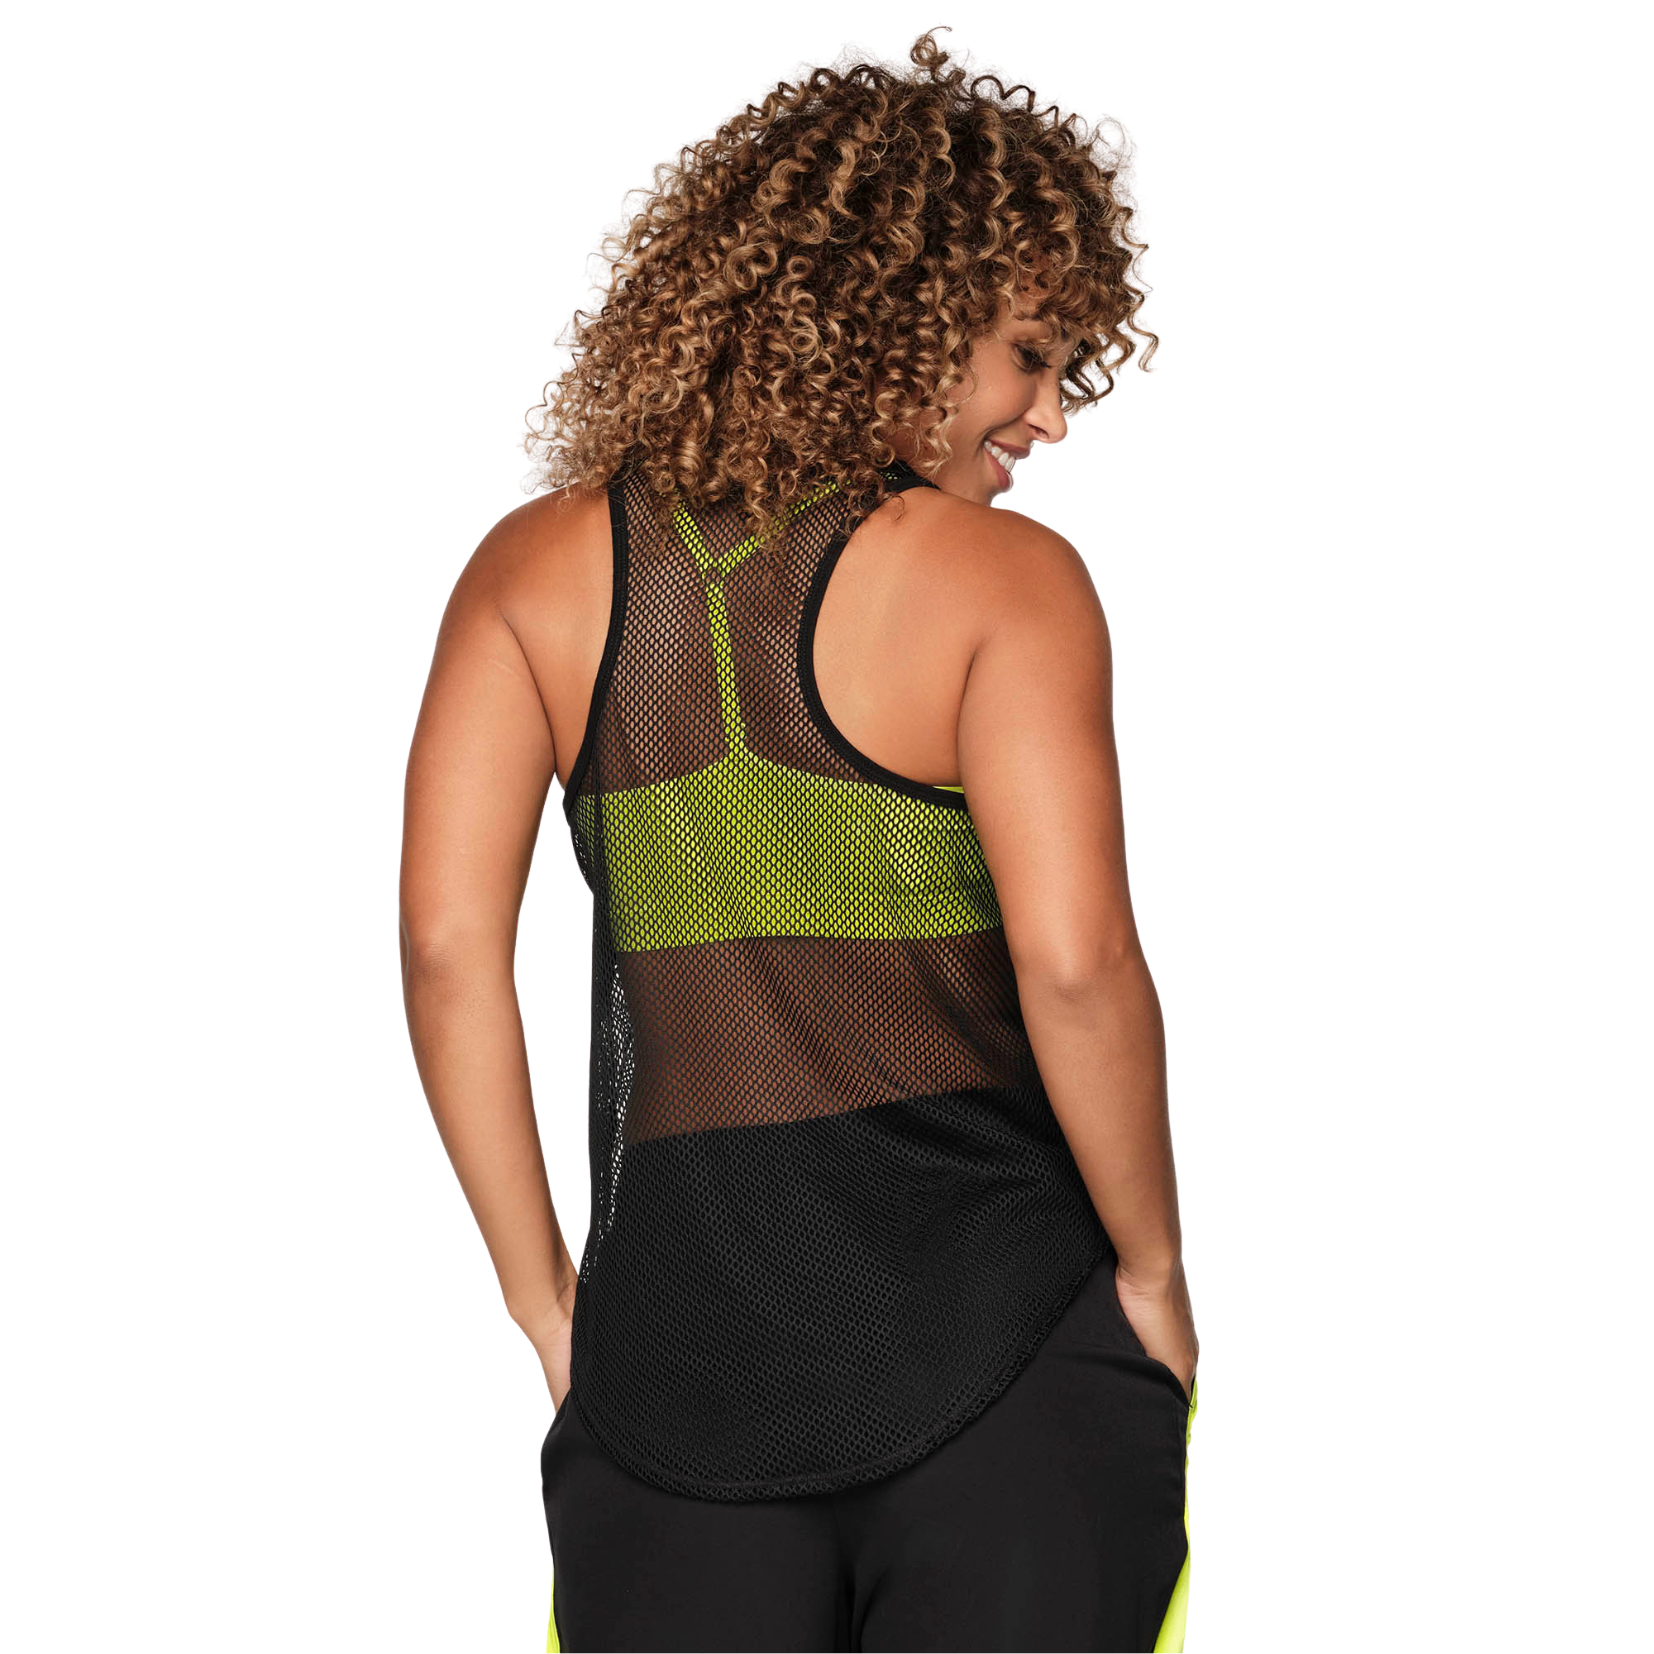 Zumba Forever High Neck Mesh Tank (Special Order)